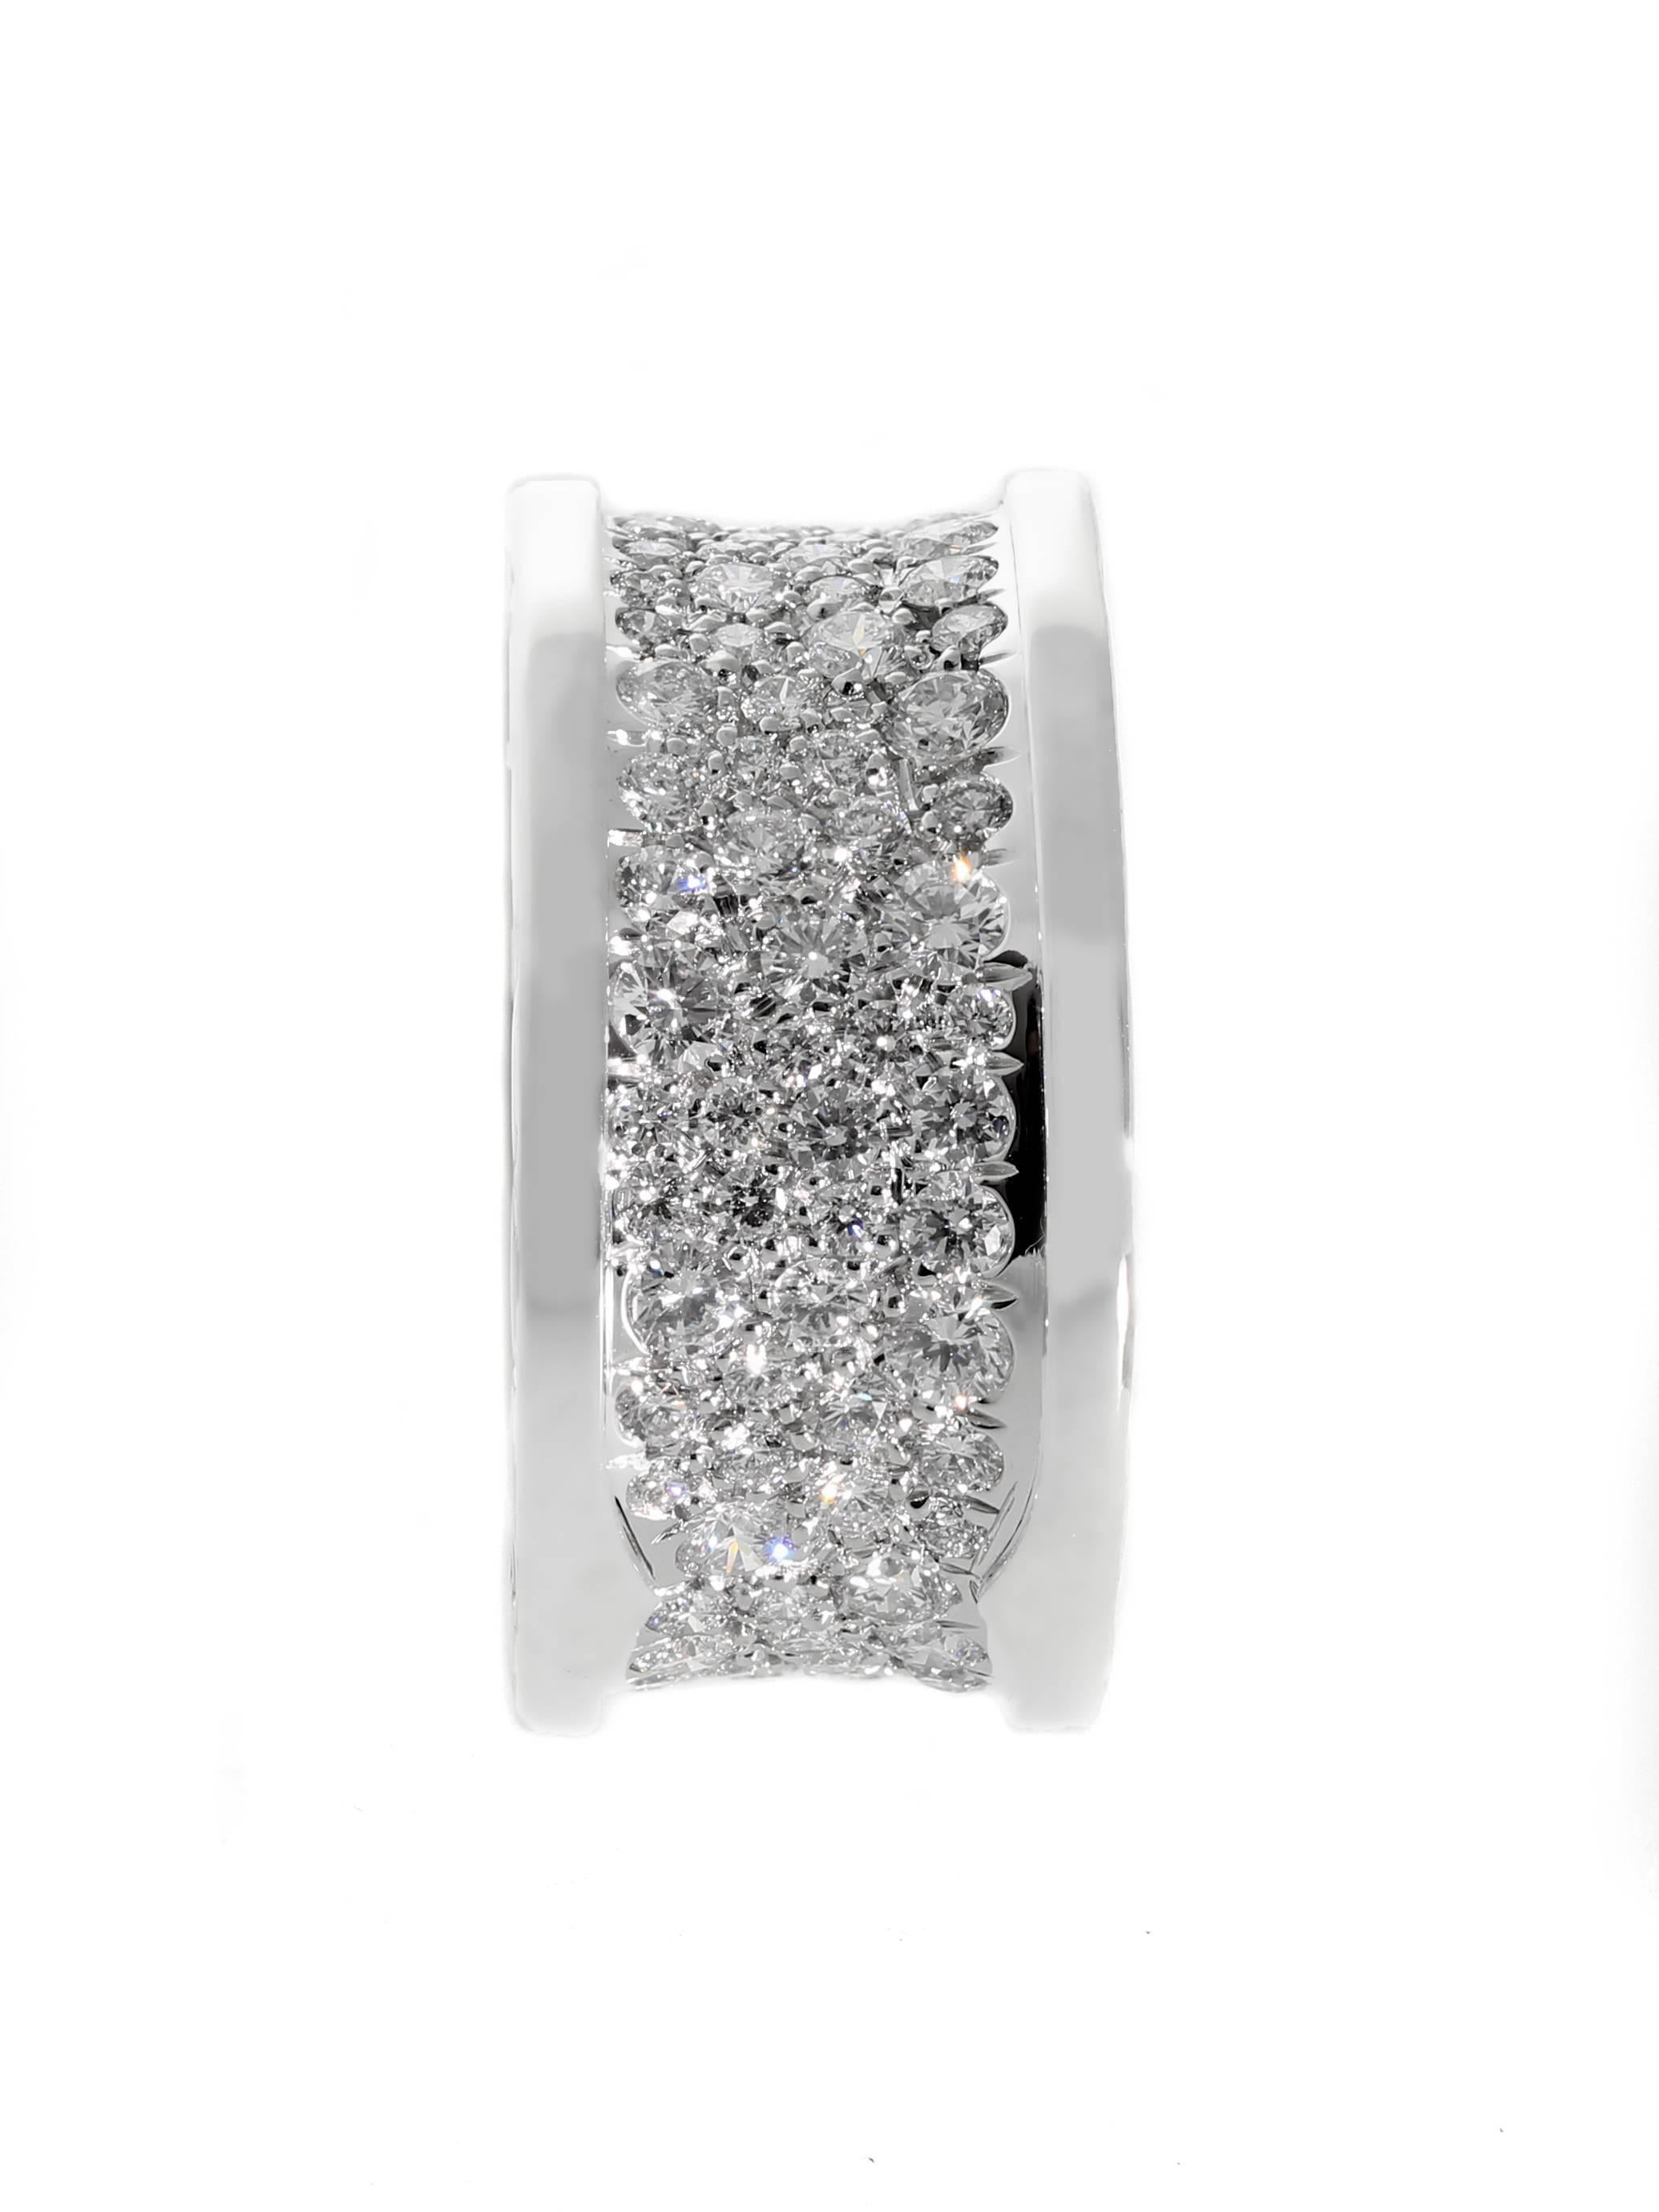 A beautiful band by Bulgari featuring 2.80ct of the finest Bulgari Vs quality round brilliant cut diamonds set in 18k white gold. 

Size: US 6 1/2 / EU 54
Dimensions: 11mm Wide (.43″ Inches)

Inventory ID: 0000170